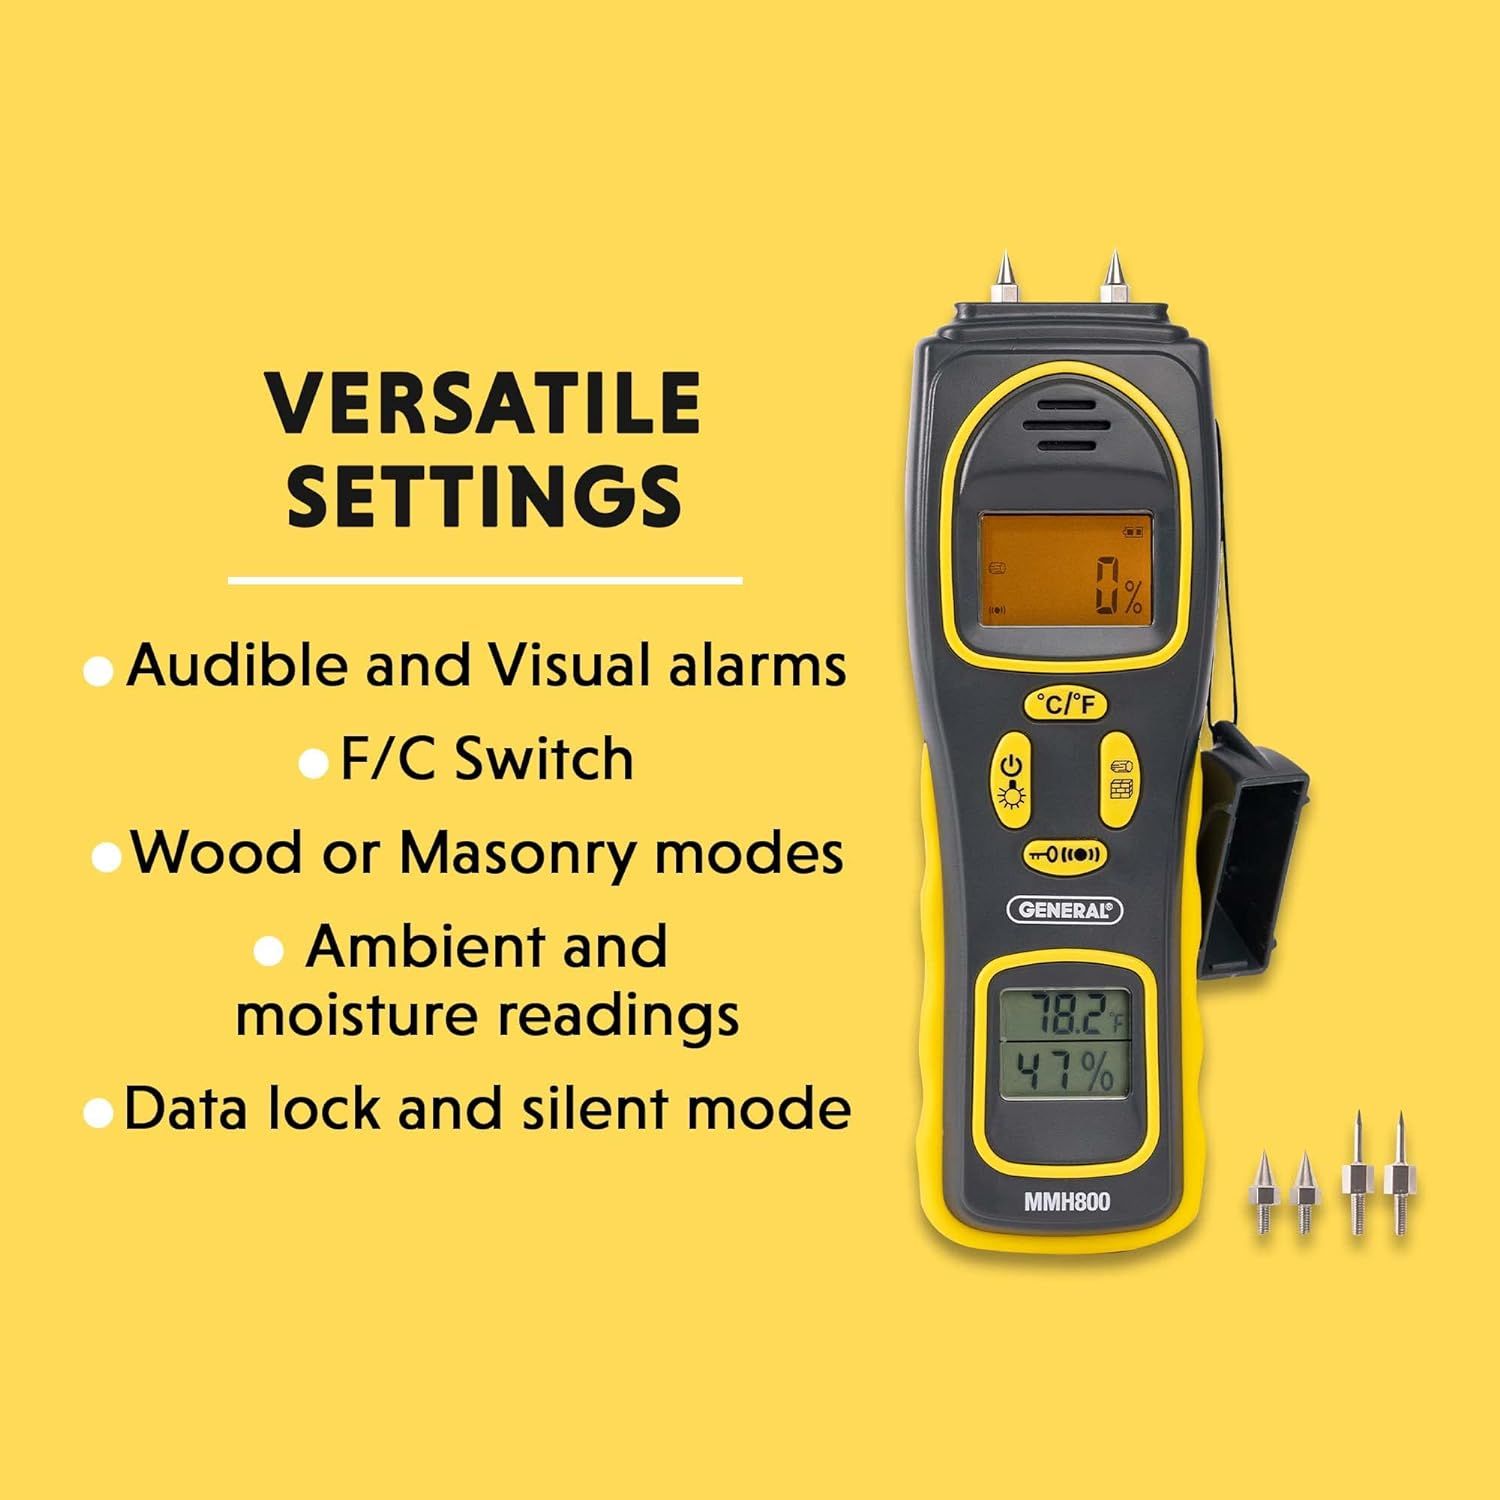 General Tools 4-in-1 Pin/Pinless Combo Moisture Meter #MMH800 - Pin/Pinless  Combo Mold Detector for Home - Dual LCD Display & Audible Alarm, Furniture  & Home Living, Home Improvement & Organisation, Home Improvement